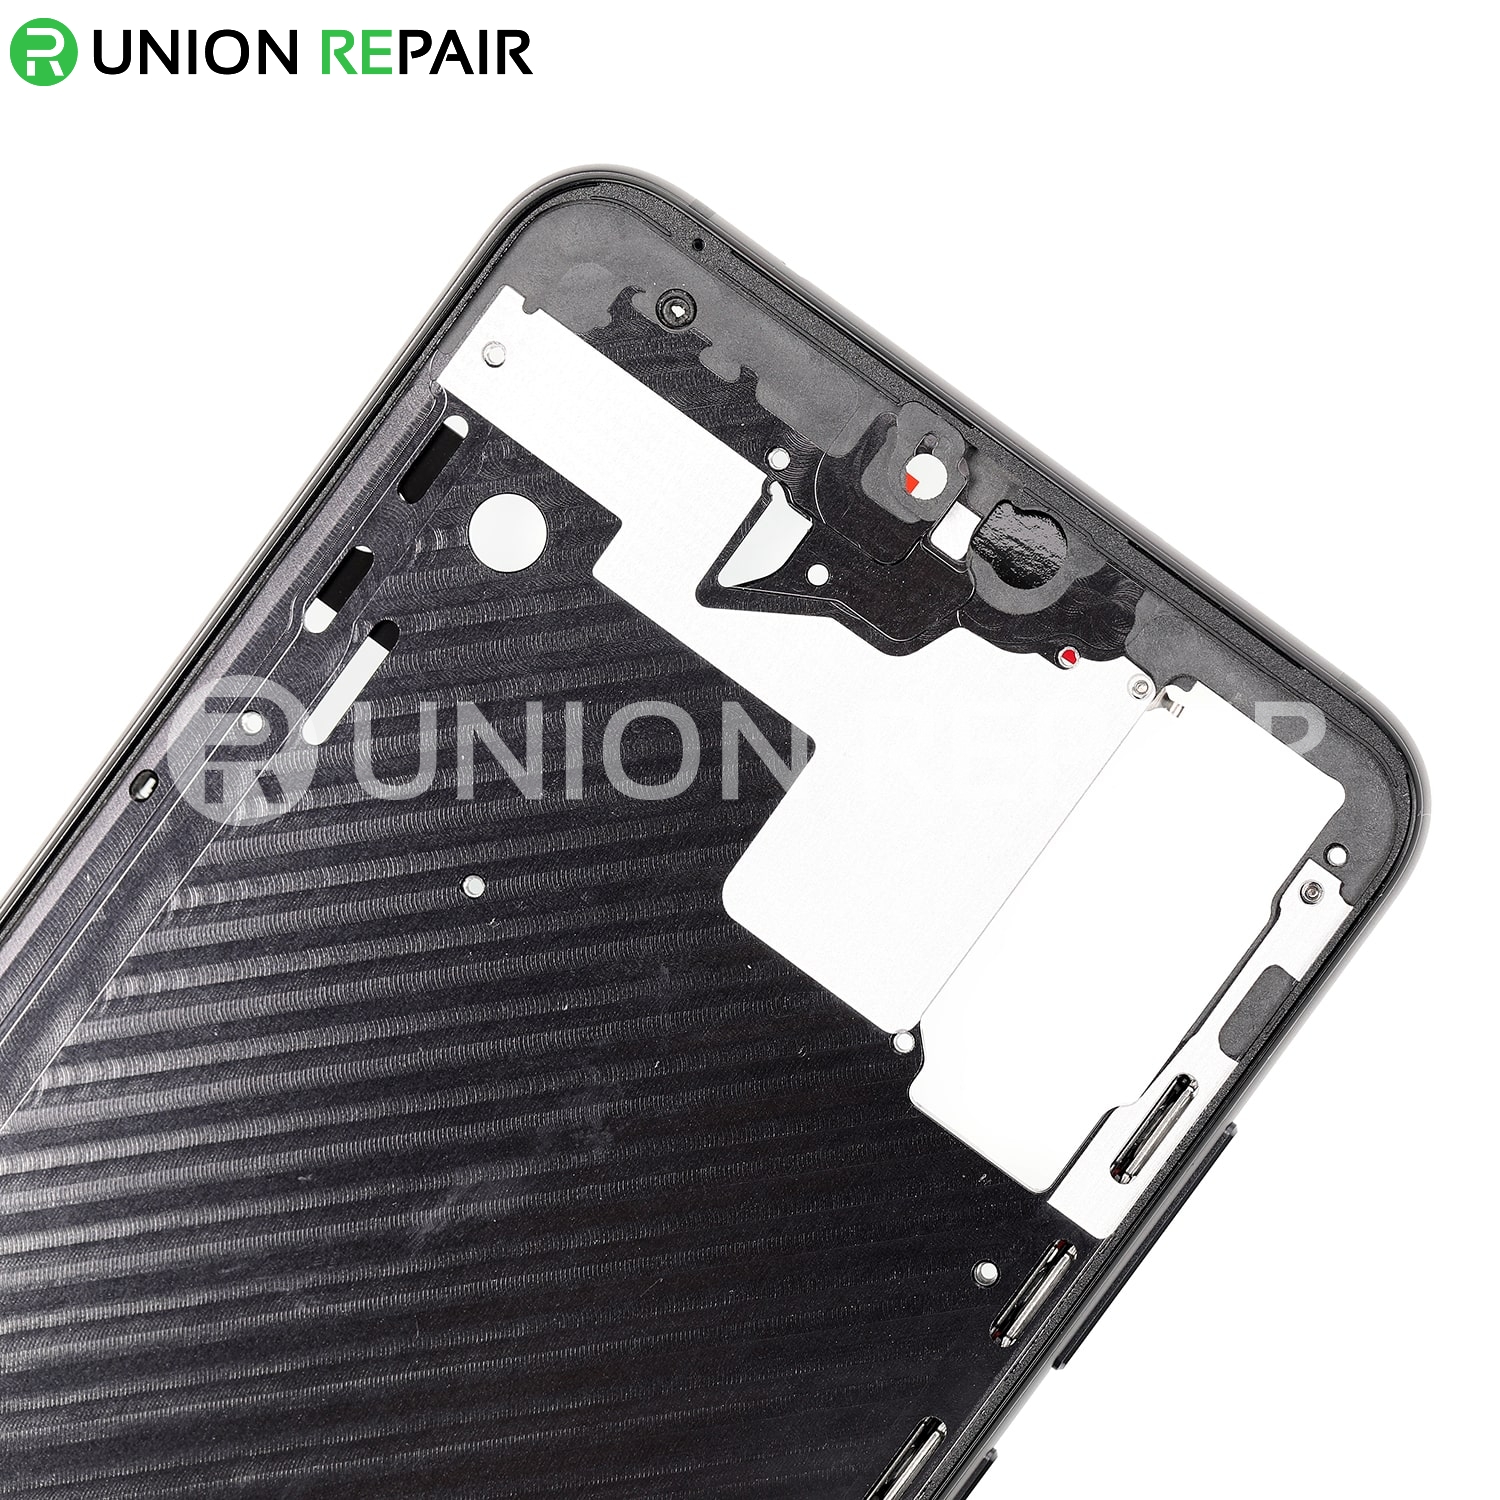 Replacement for Huawei P20 Pro Front Housing LCD Frame Bezel Plate - Black